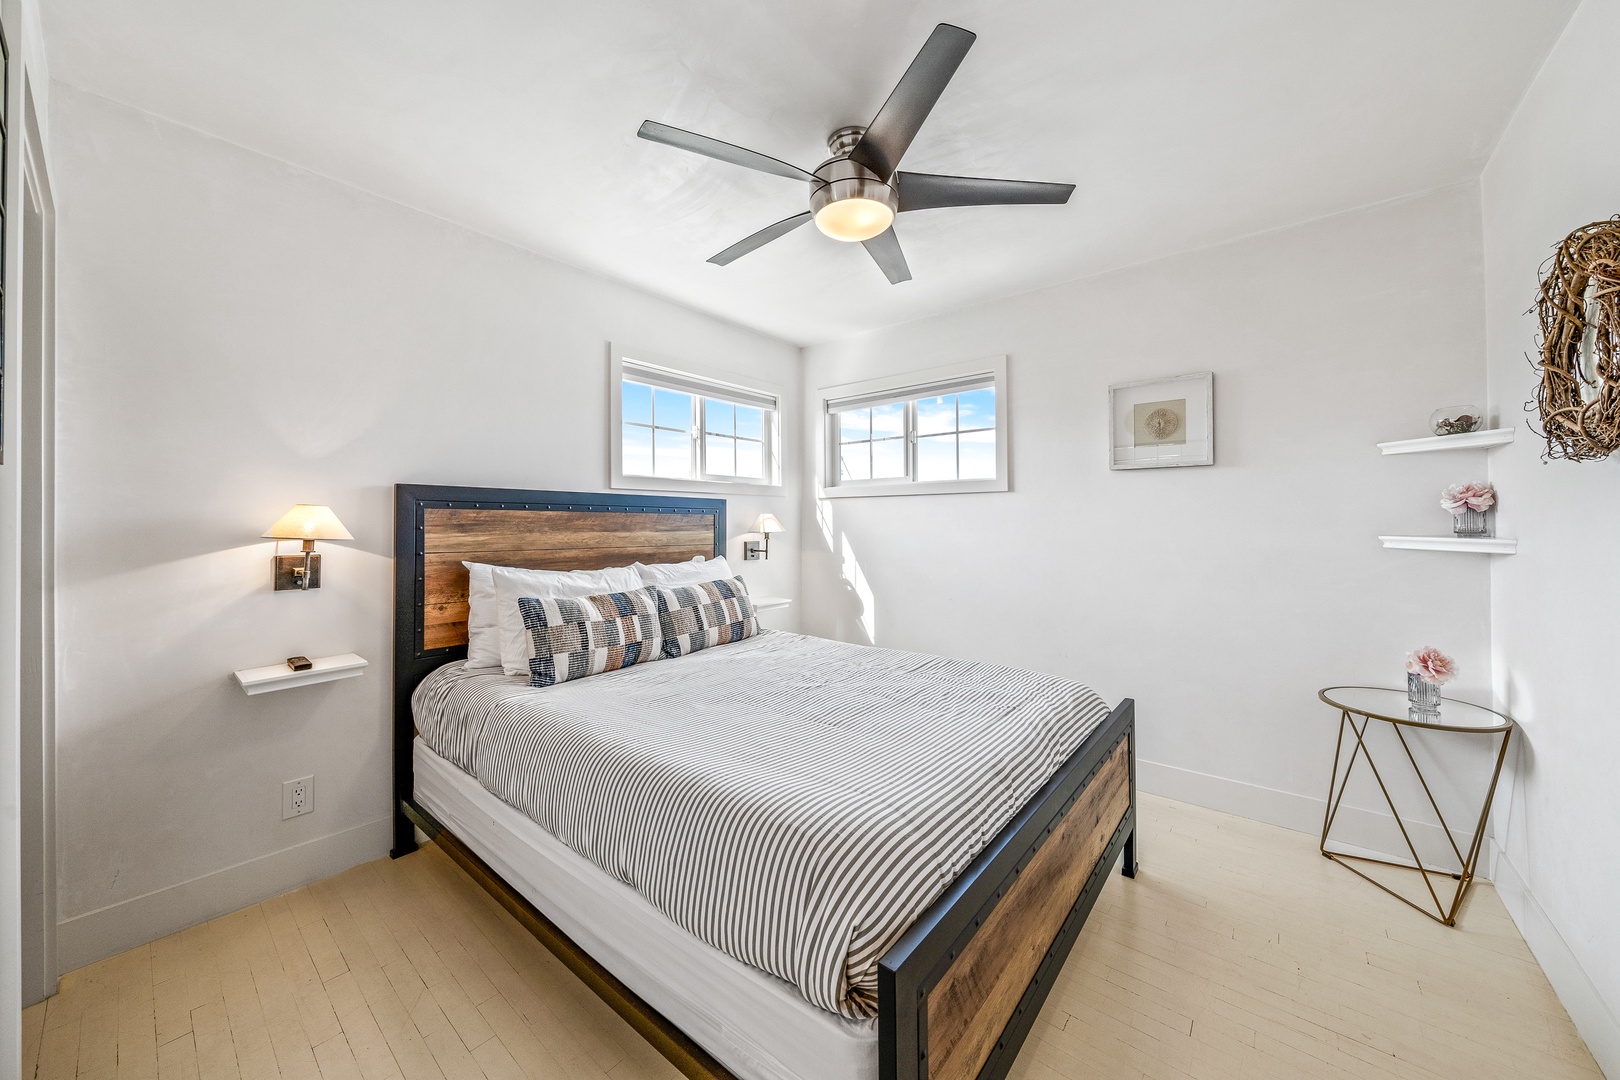 The first of two spacious bedrooms offers a king bed & ceiling fan